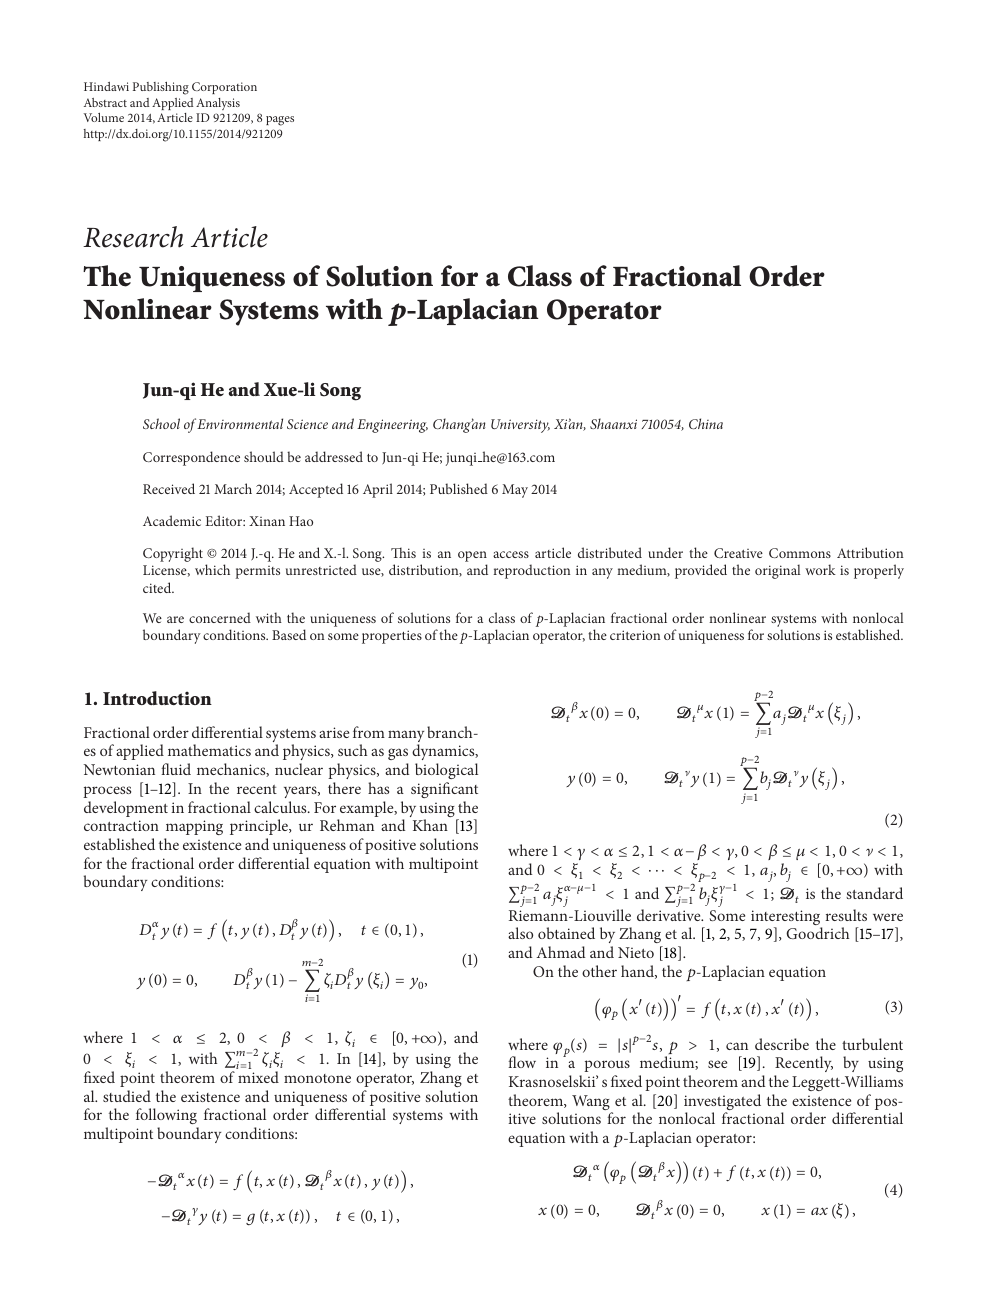 The Uniqueness Of Solution For A Class Of Fractional Order Nonlinear Systems With P Laplacian Operator Topic Of Research Paper In Mathematics Download Scholarly Article Pdf And Read For Free On Cyberleninka